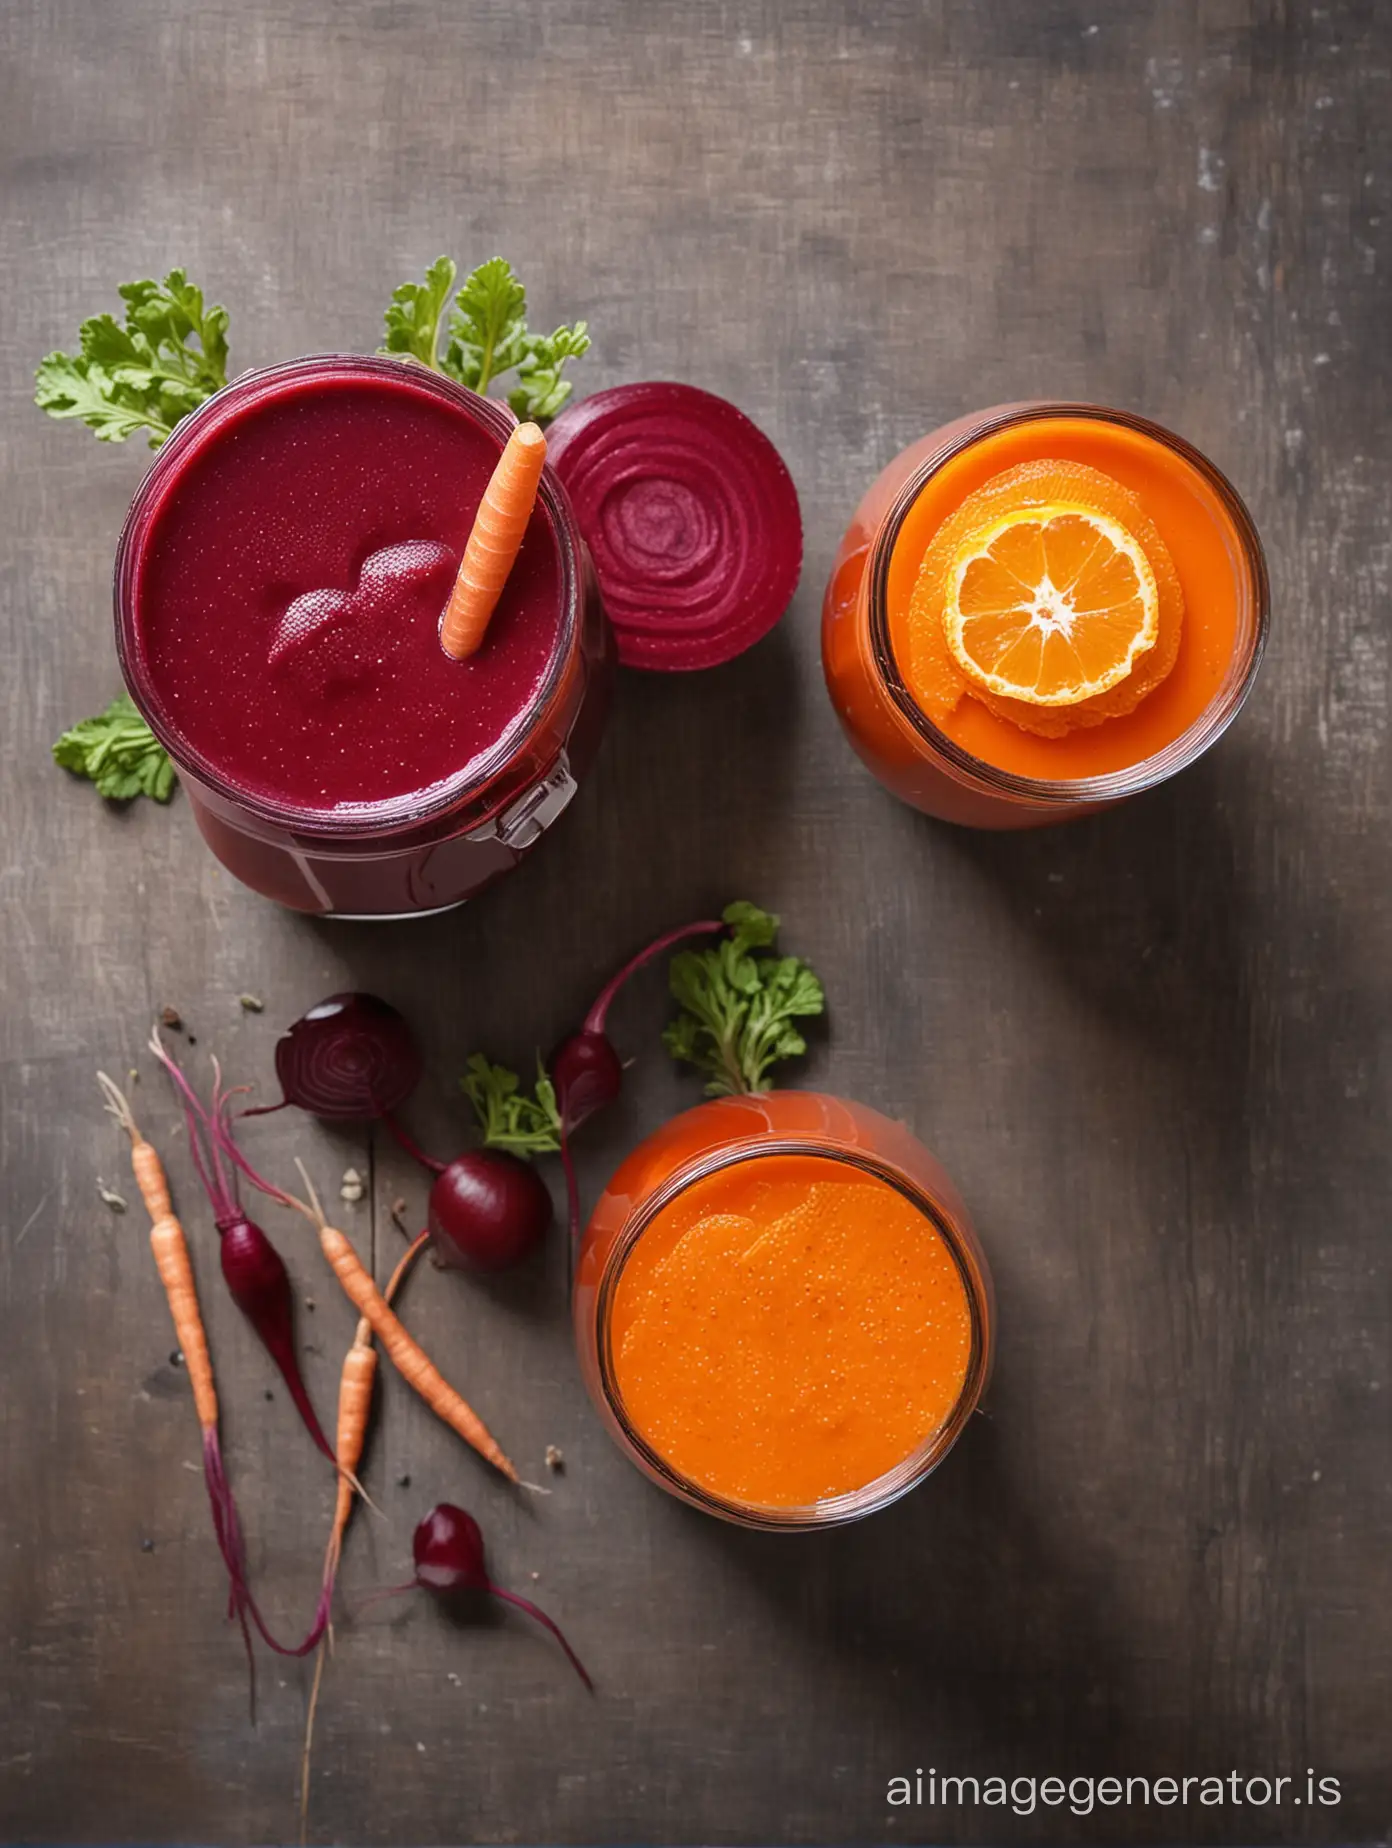 Vibrant-Freshly-Squeezed-Orange-Carrot-and-Beetroot-Juice-Blend